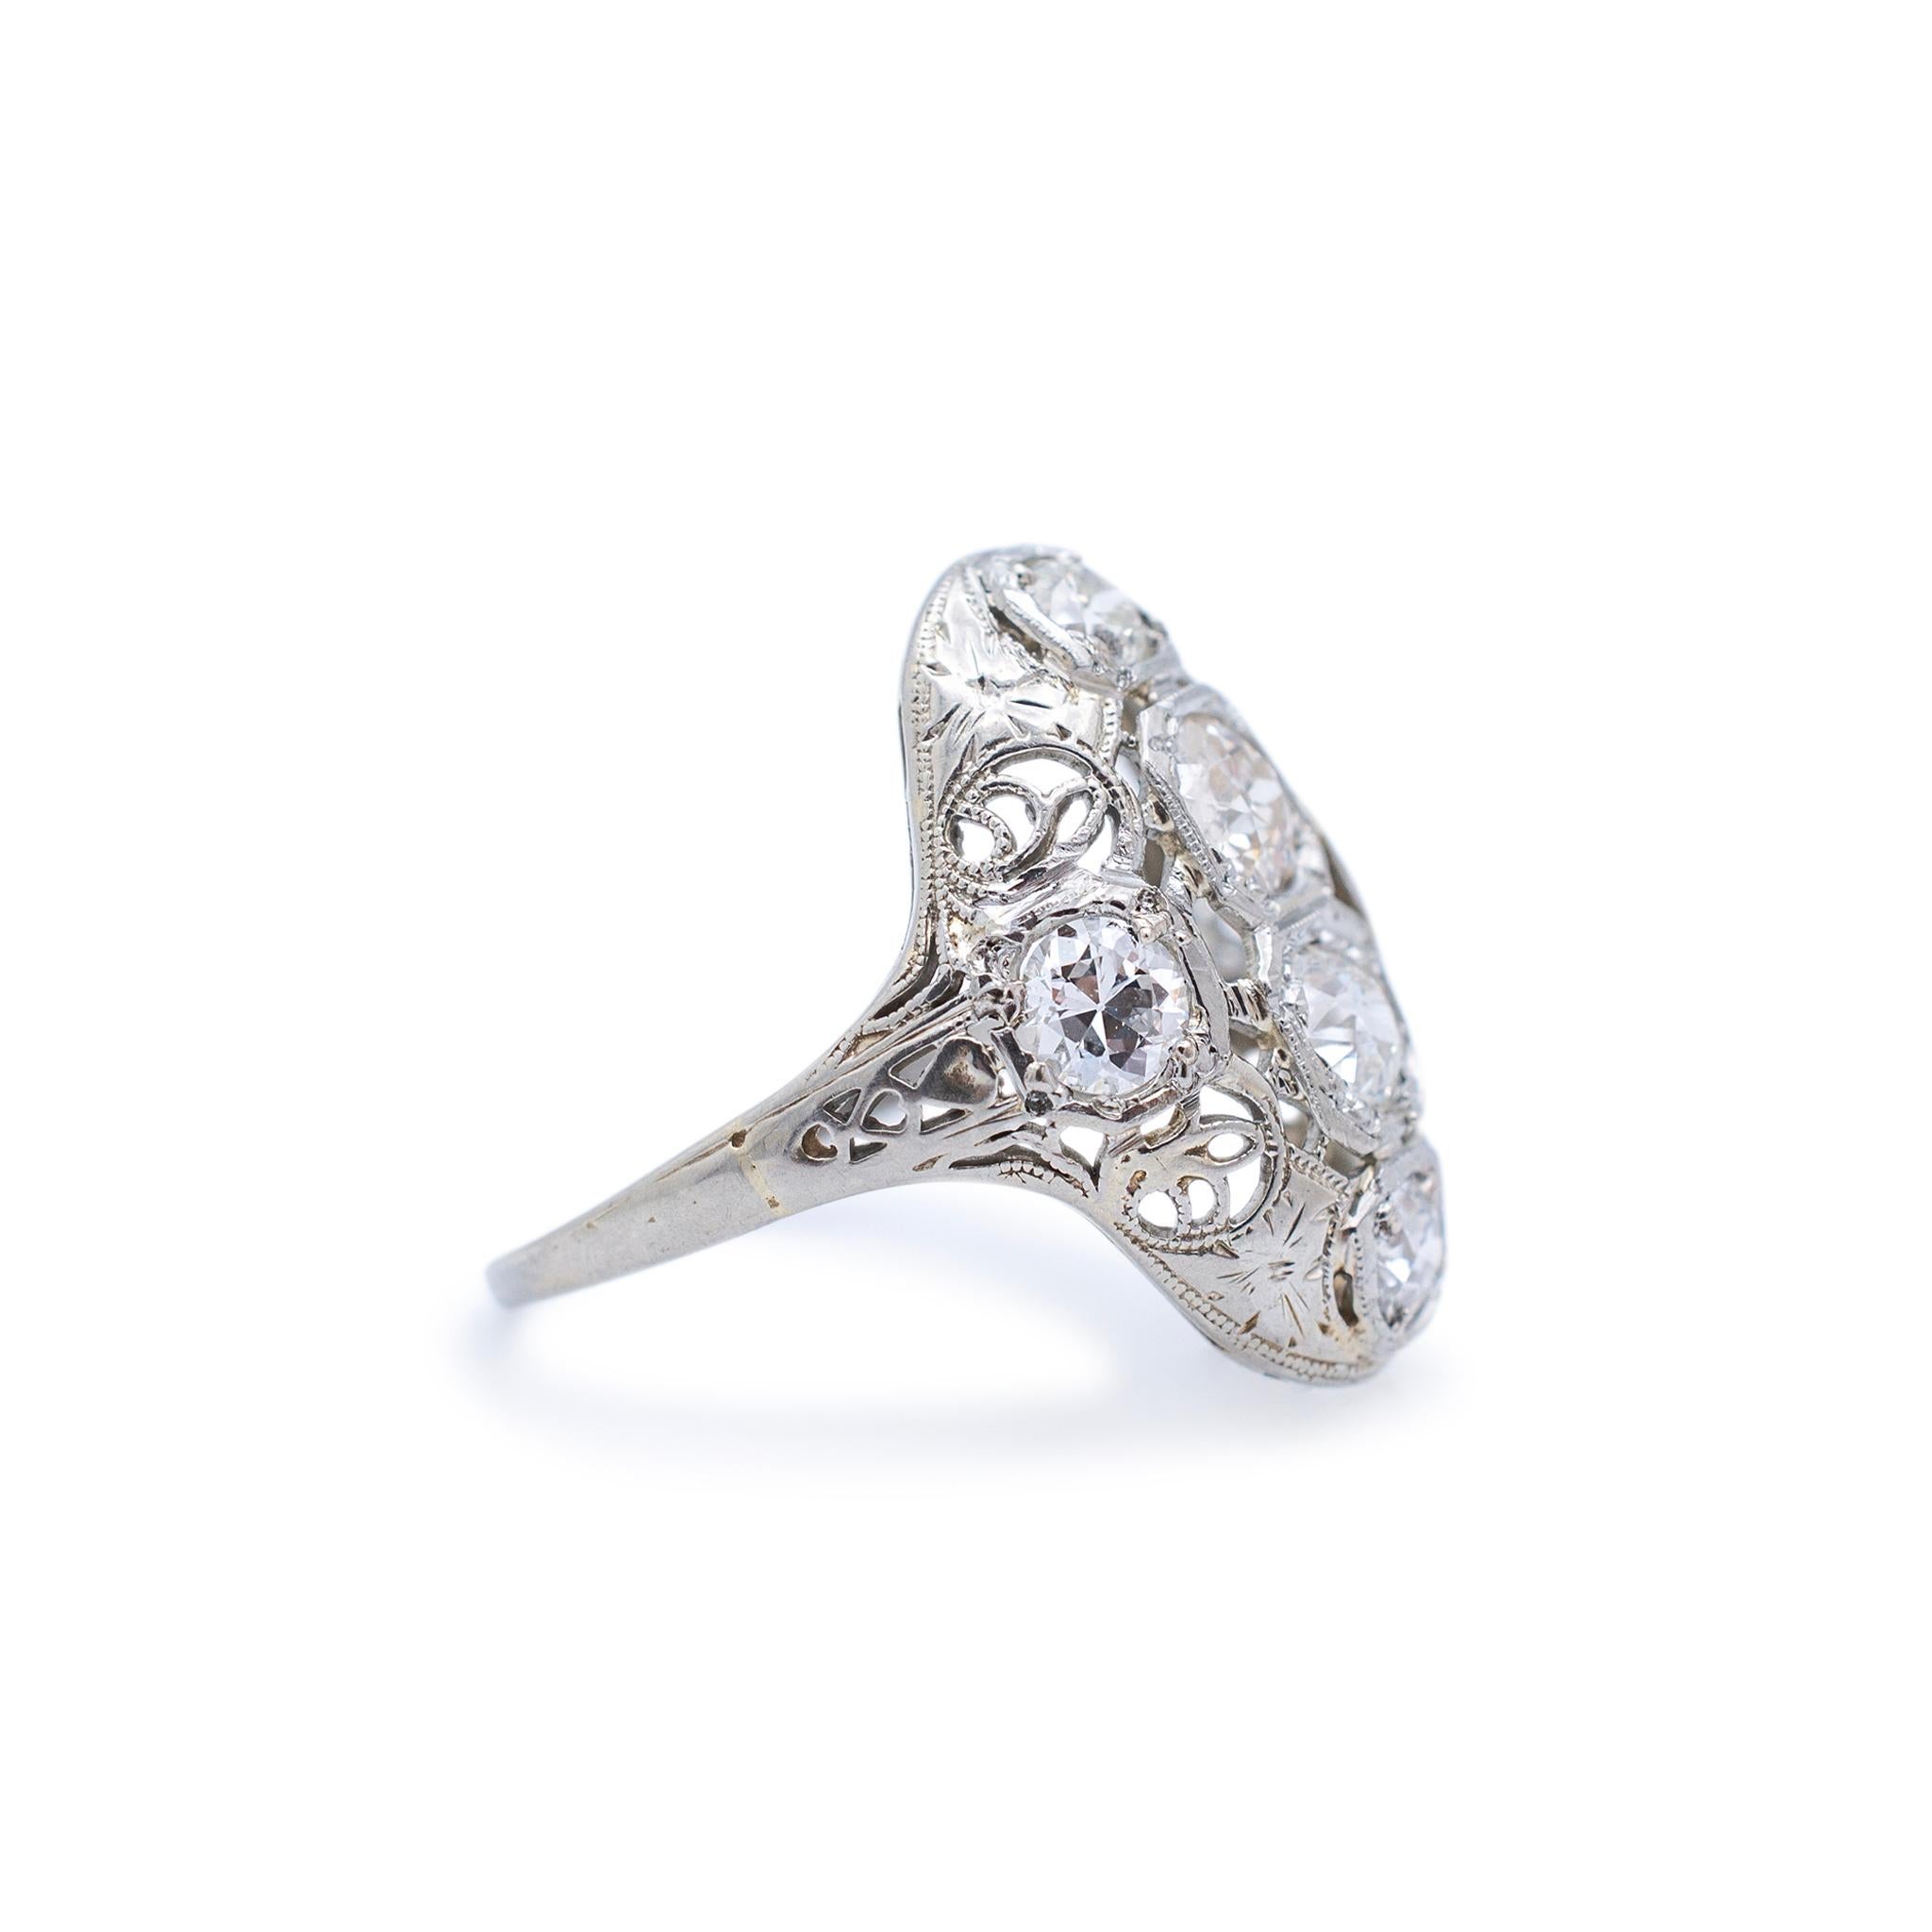 Antique Art Deco Filigreed 18K White Gold Old European Cut Diamond Cocktail Ring In Excellent Condition For Sale In Houston, TX